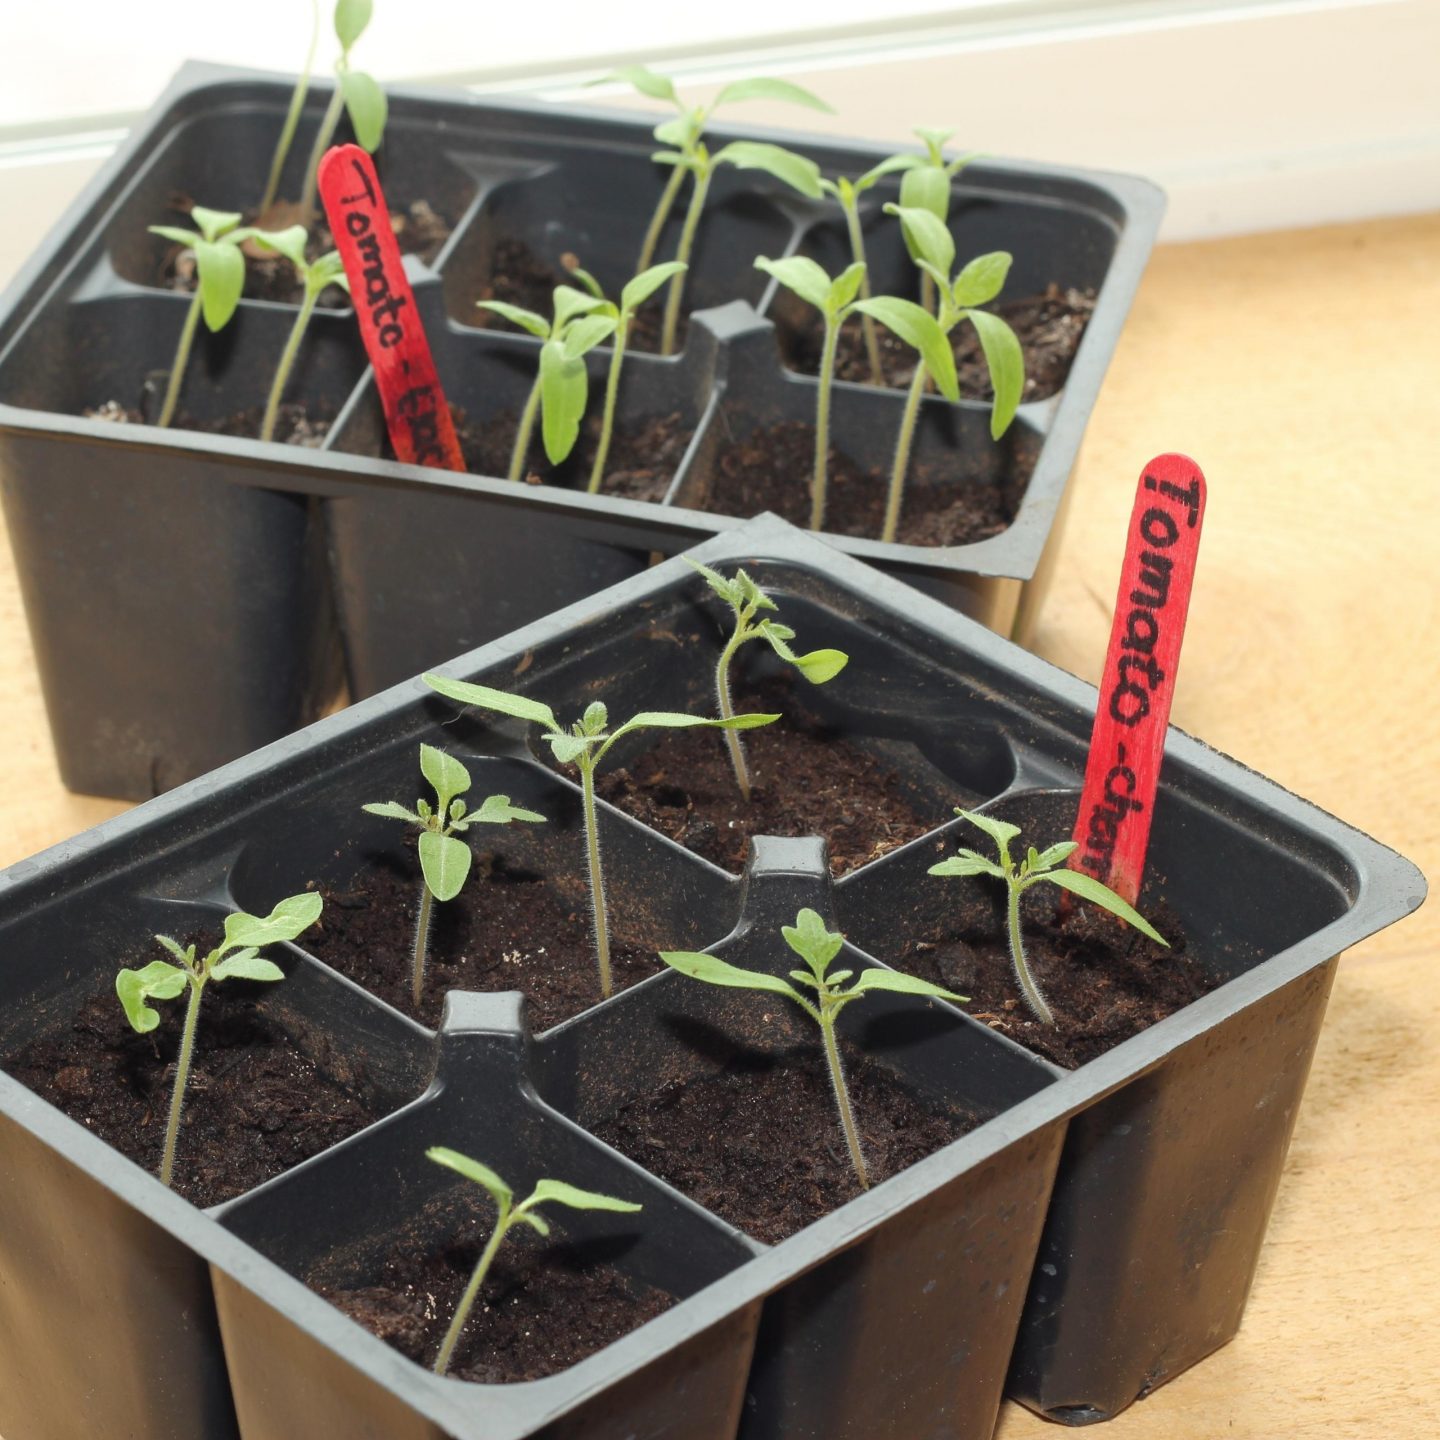 Tomato seedlings grown from seed in black plastic seed trays with 6 cells